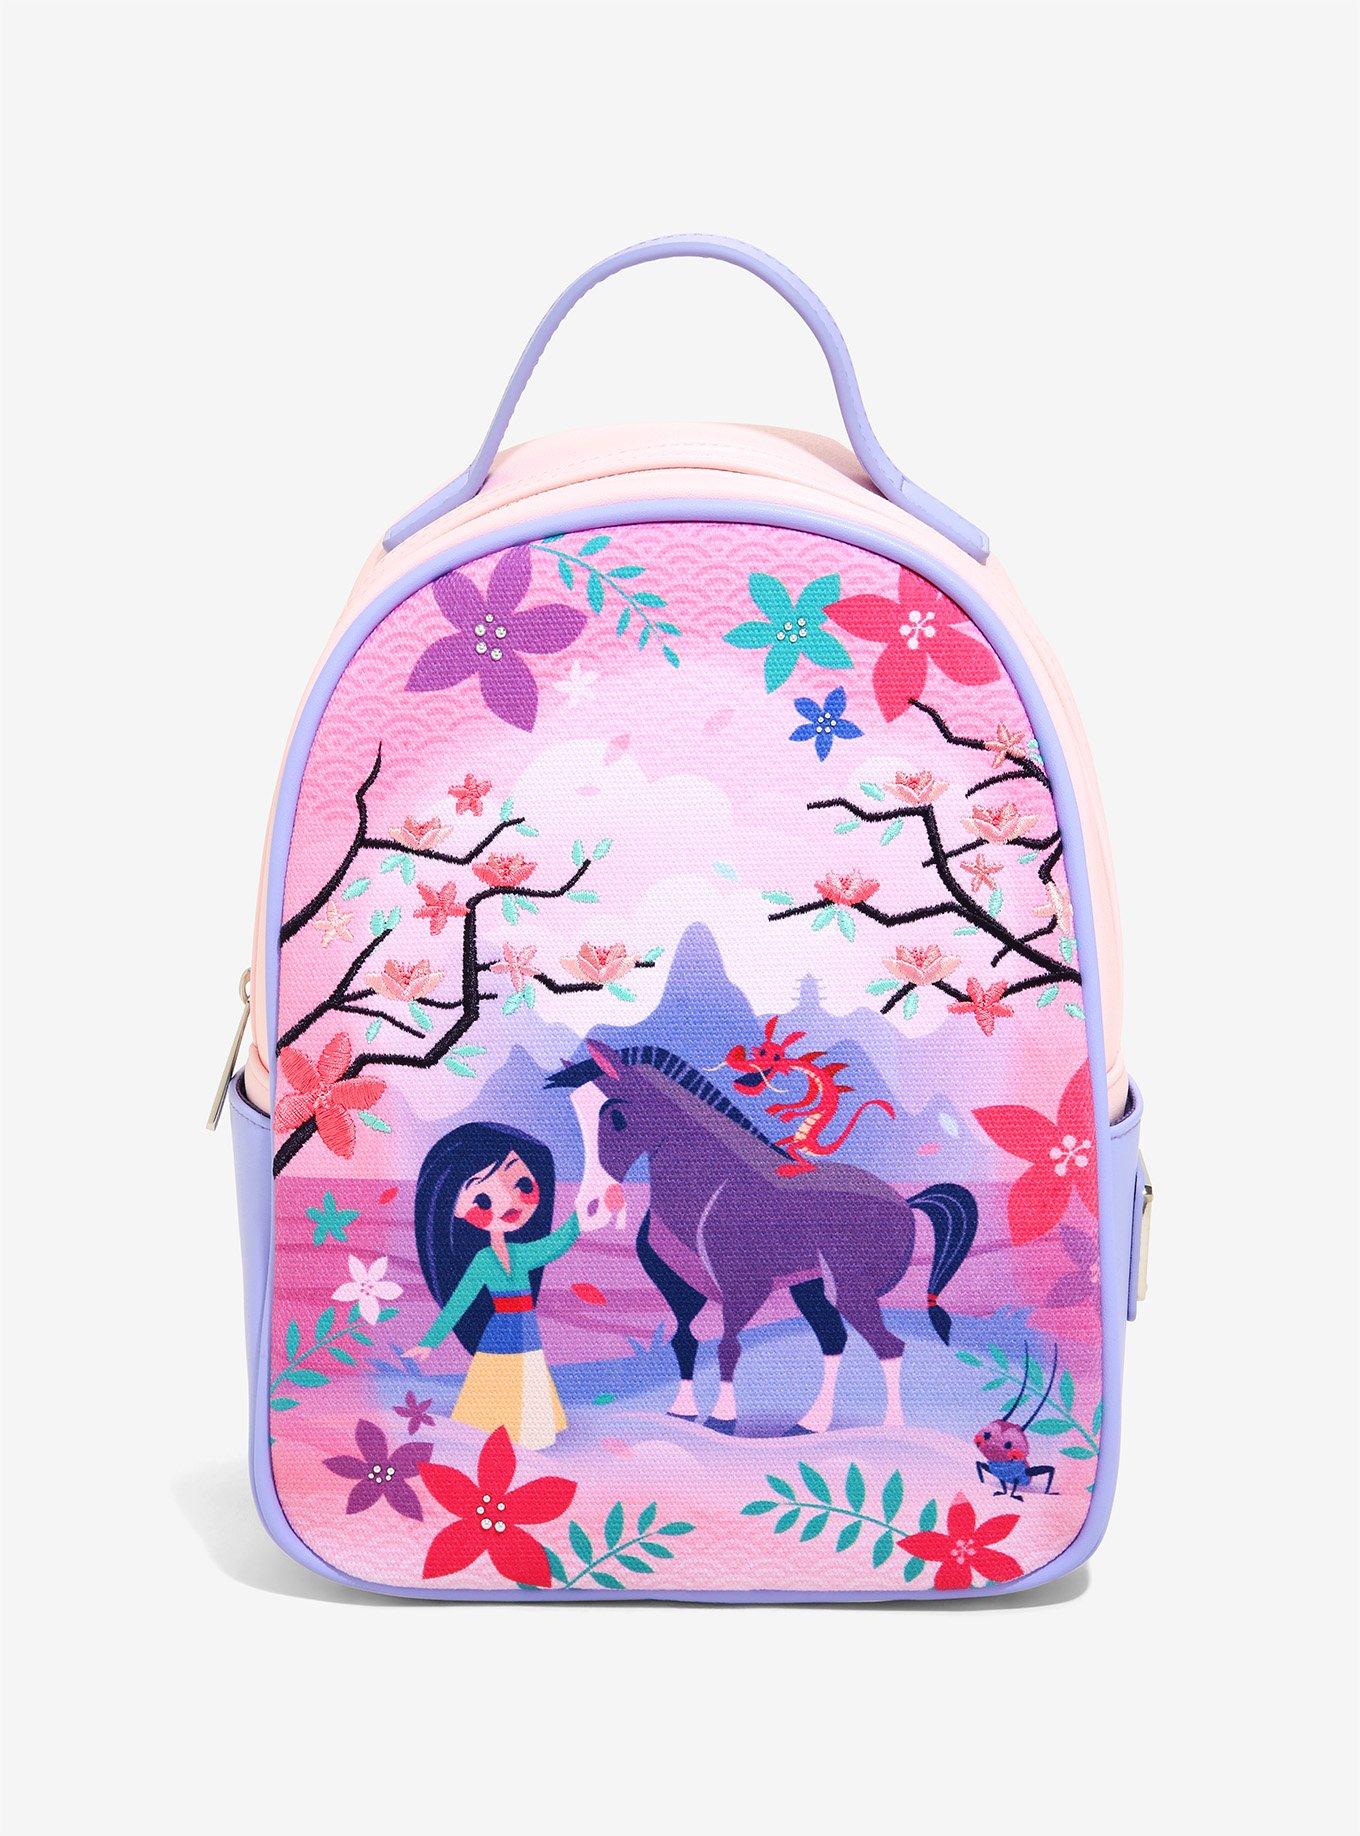 Buy Your Mulan Loungefly Backpack (Free Shipping) - Merchoid